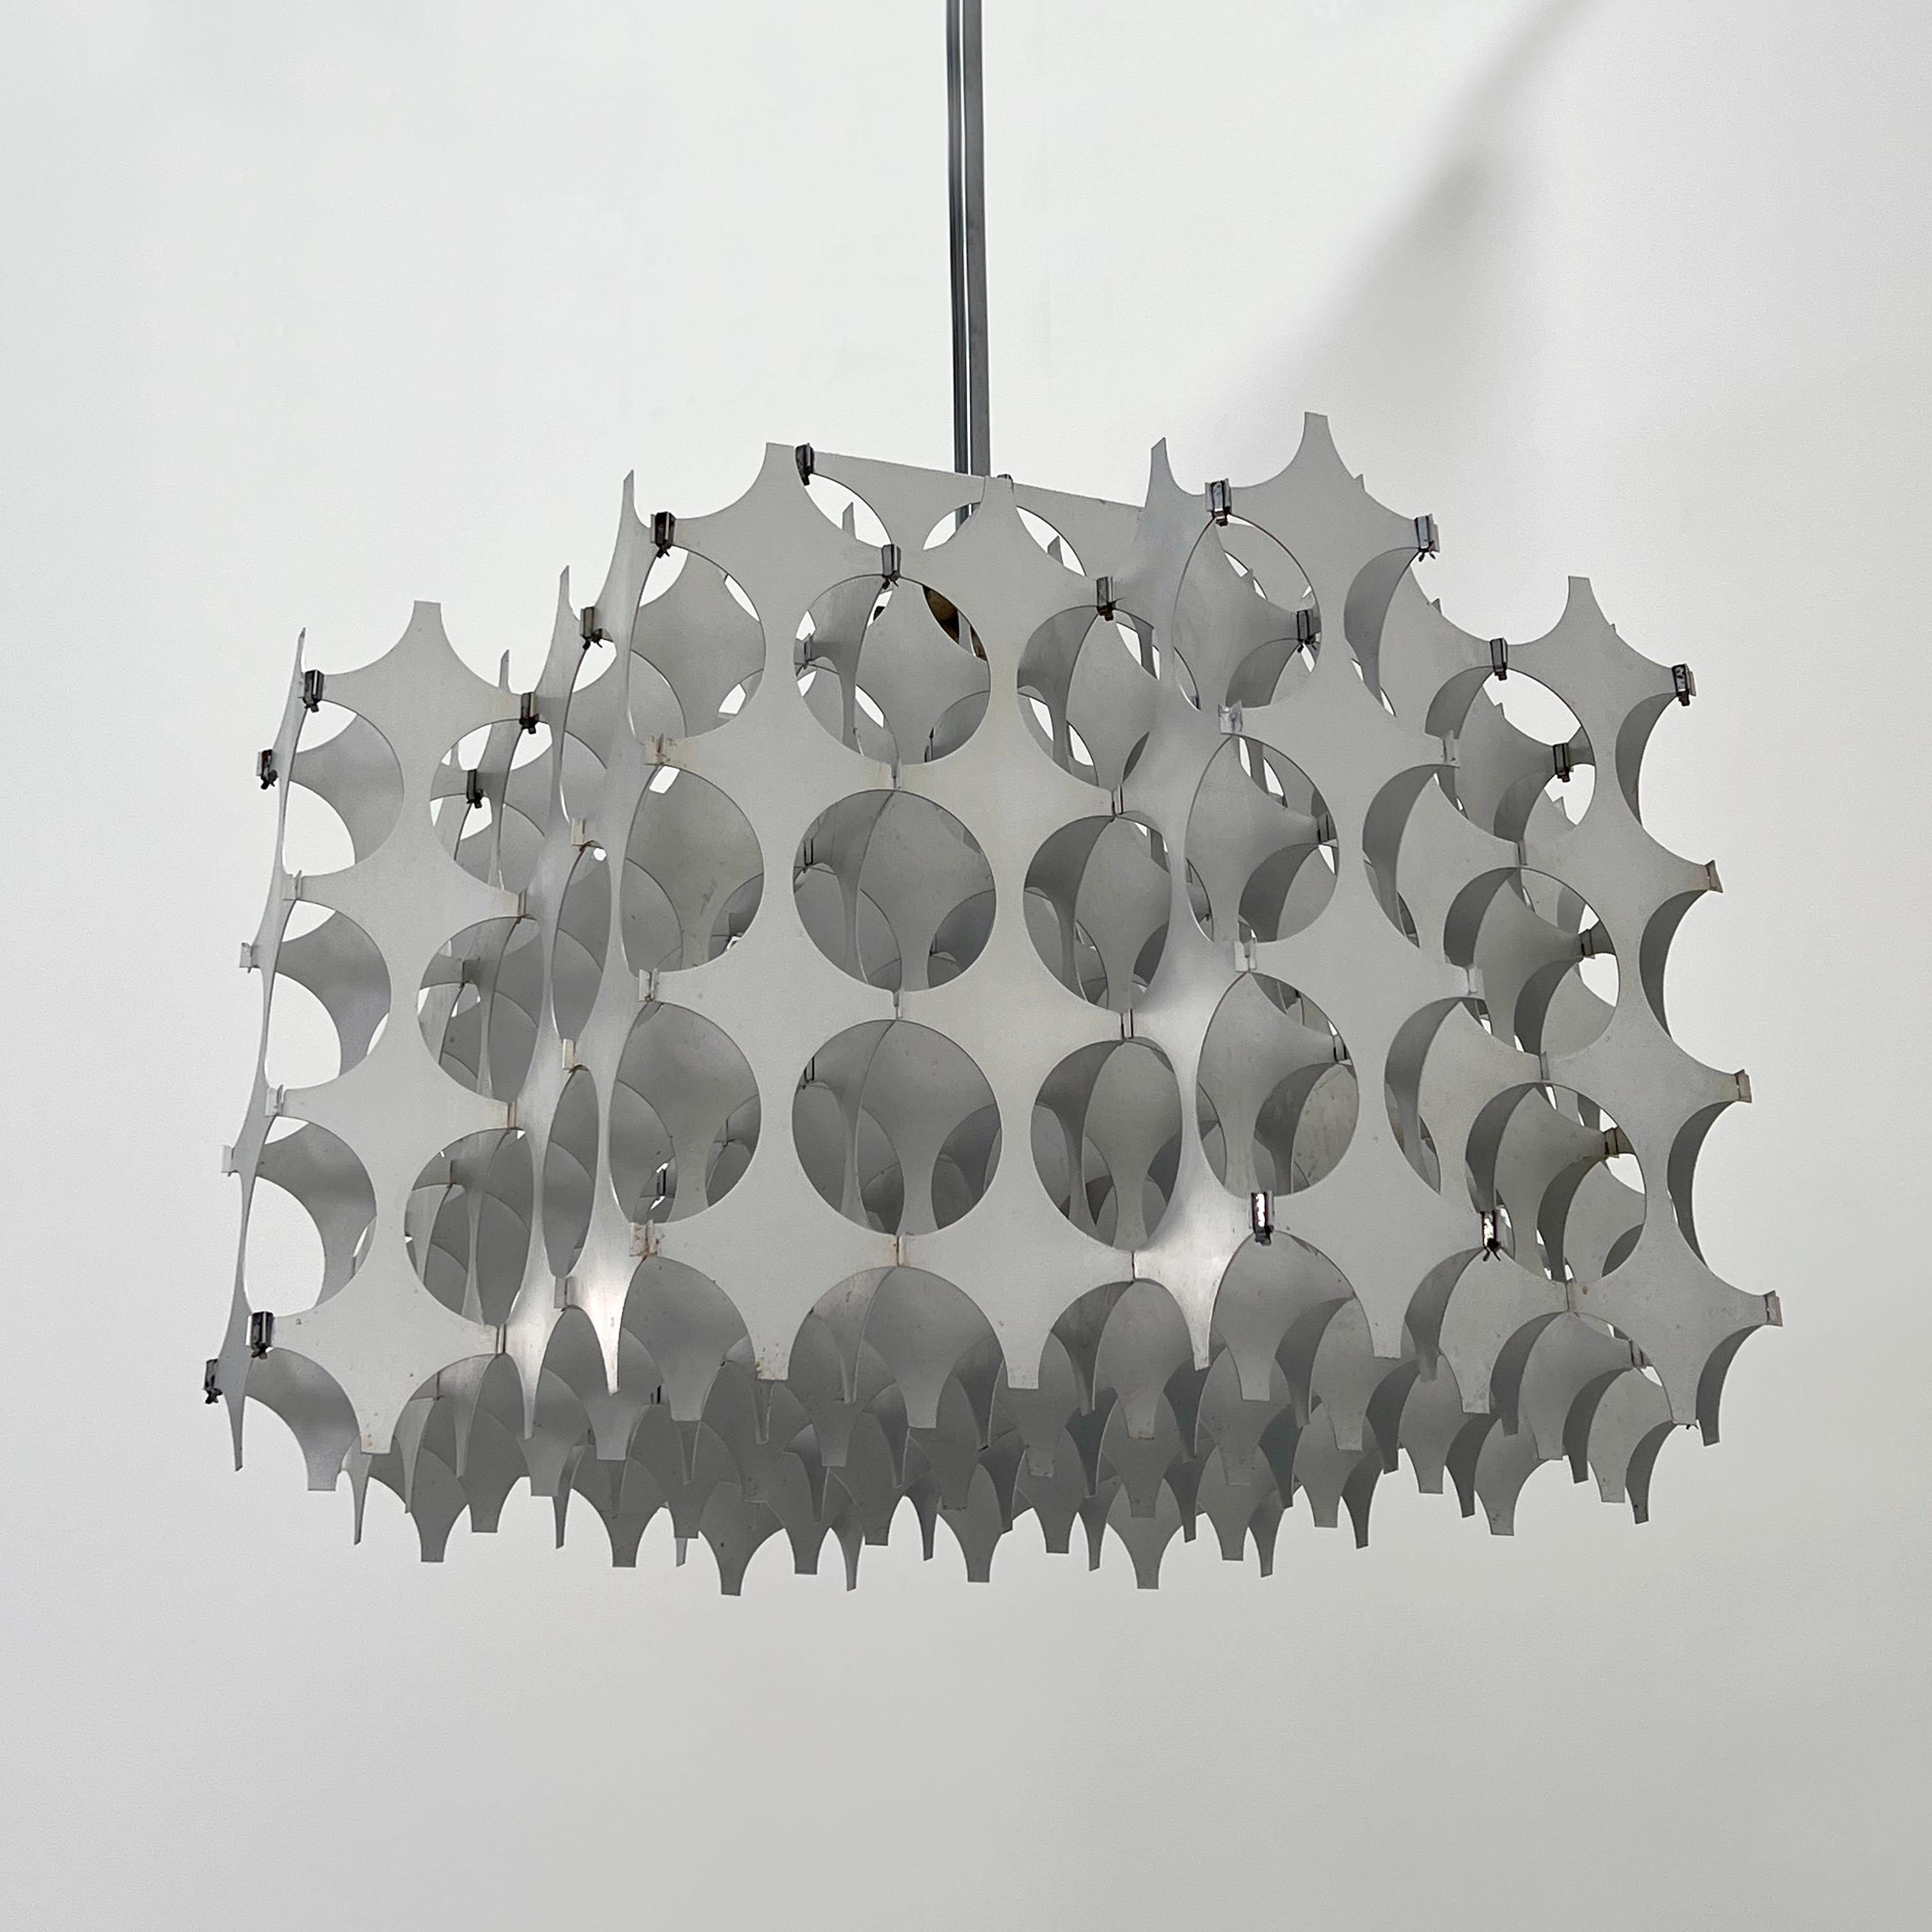 Cynthia Pendant Light by Mario Marenco for Artemide, 1960s For Sale 3